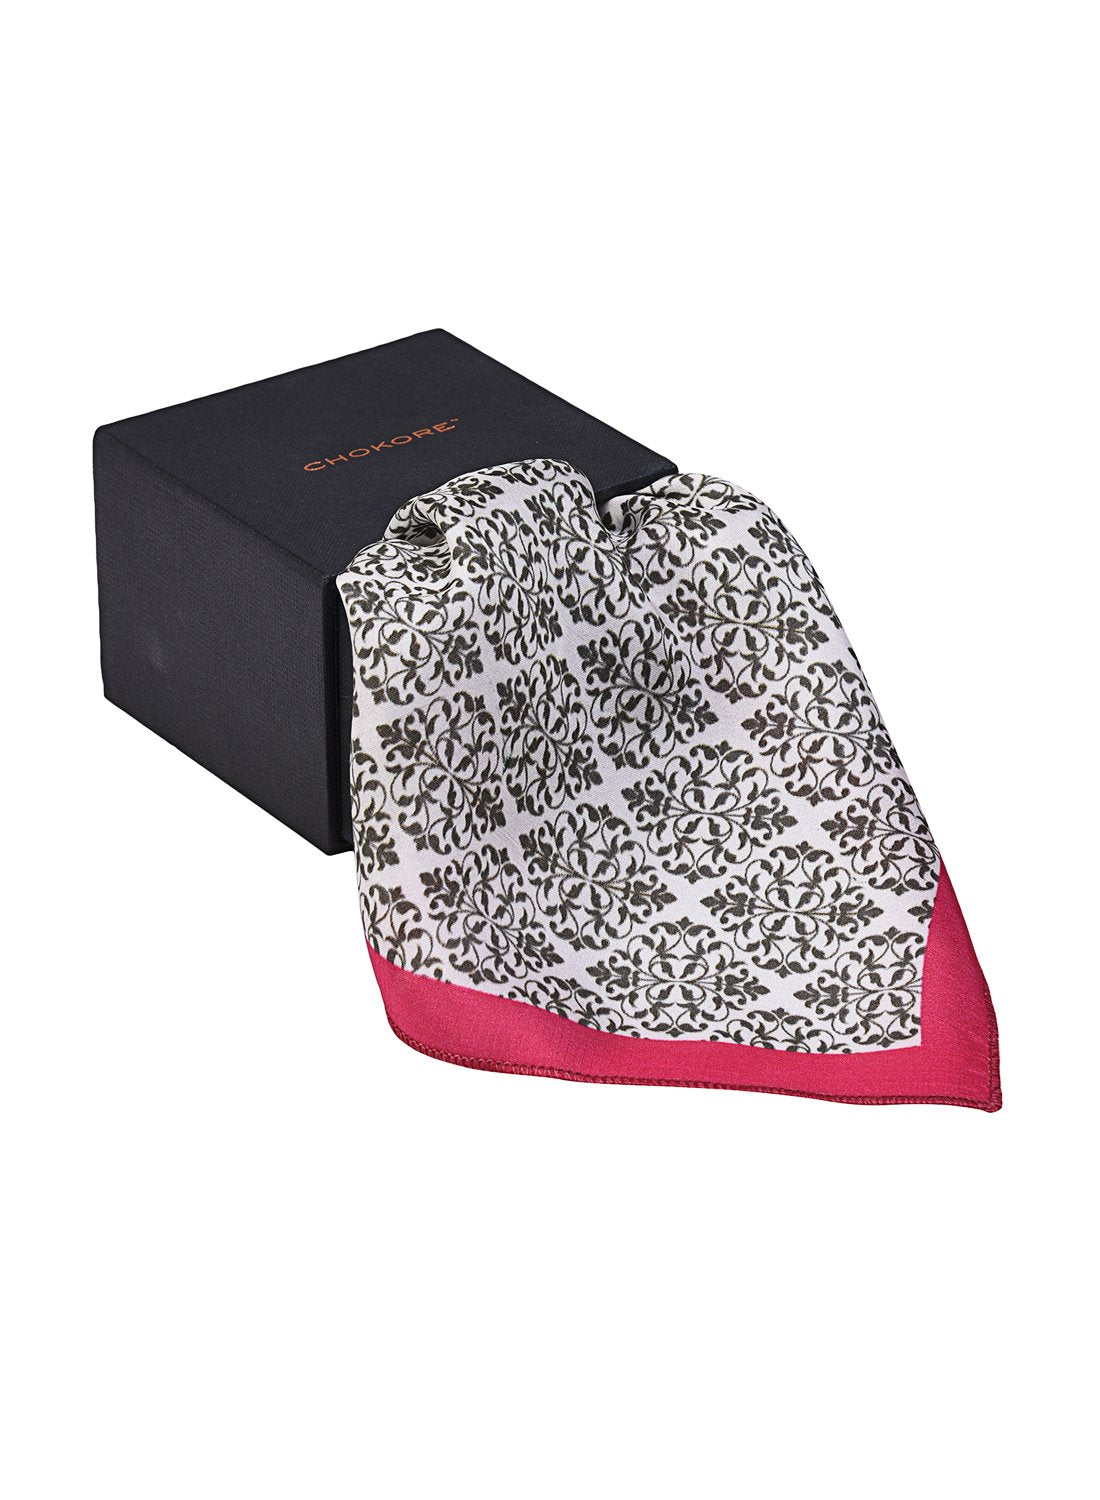 Chokore White & Black Silk Pocket Square from Indian at Heart collection